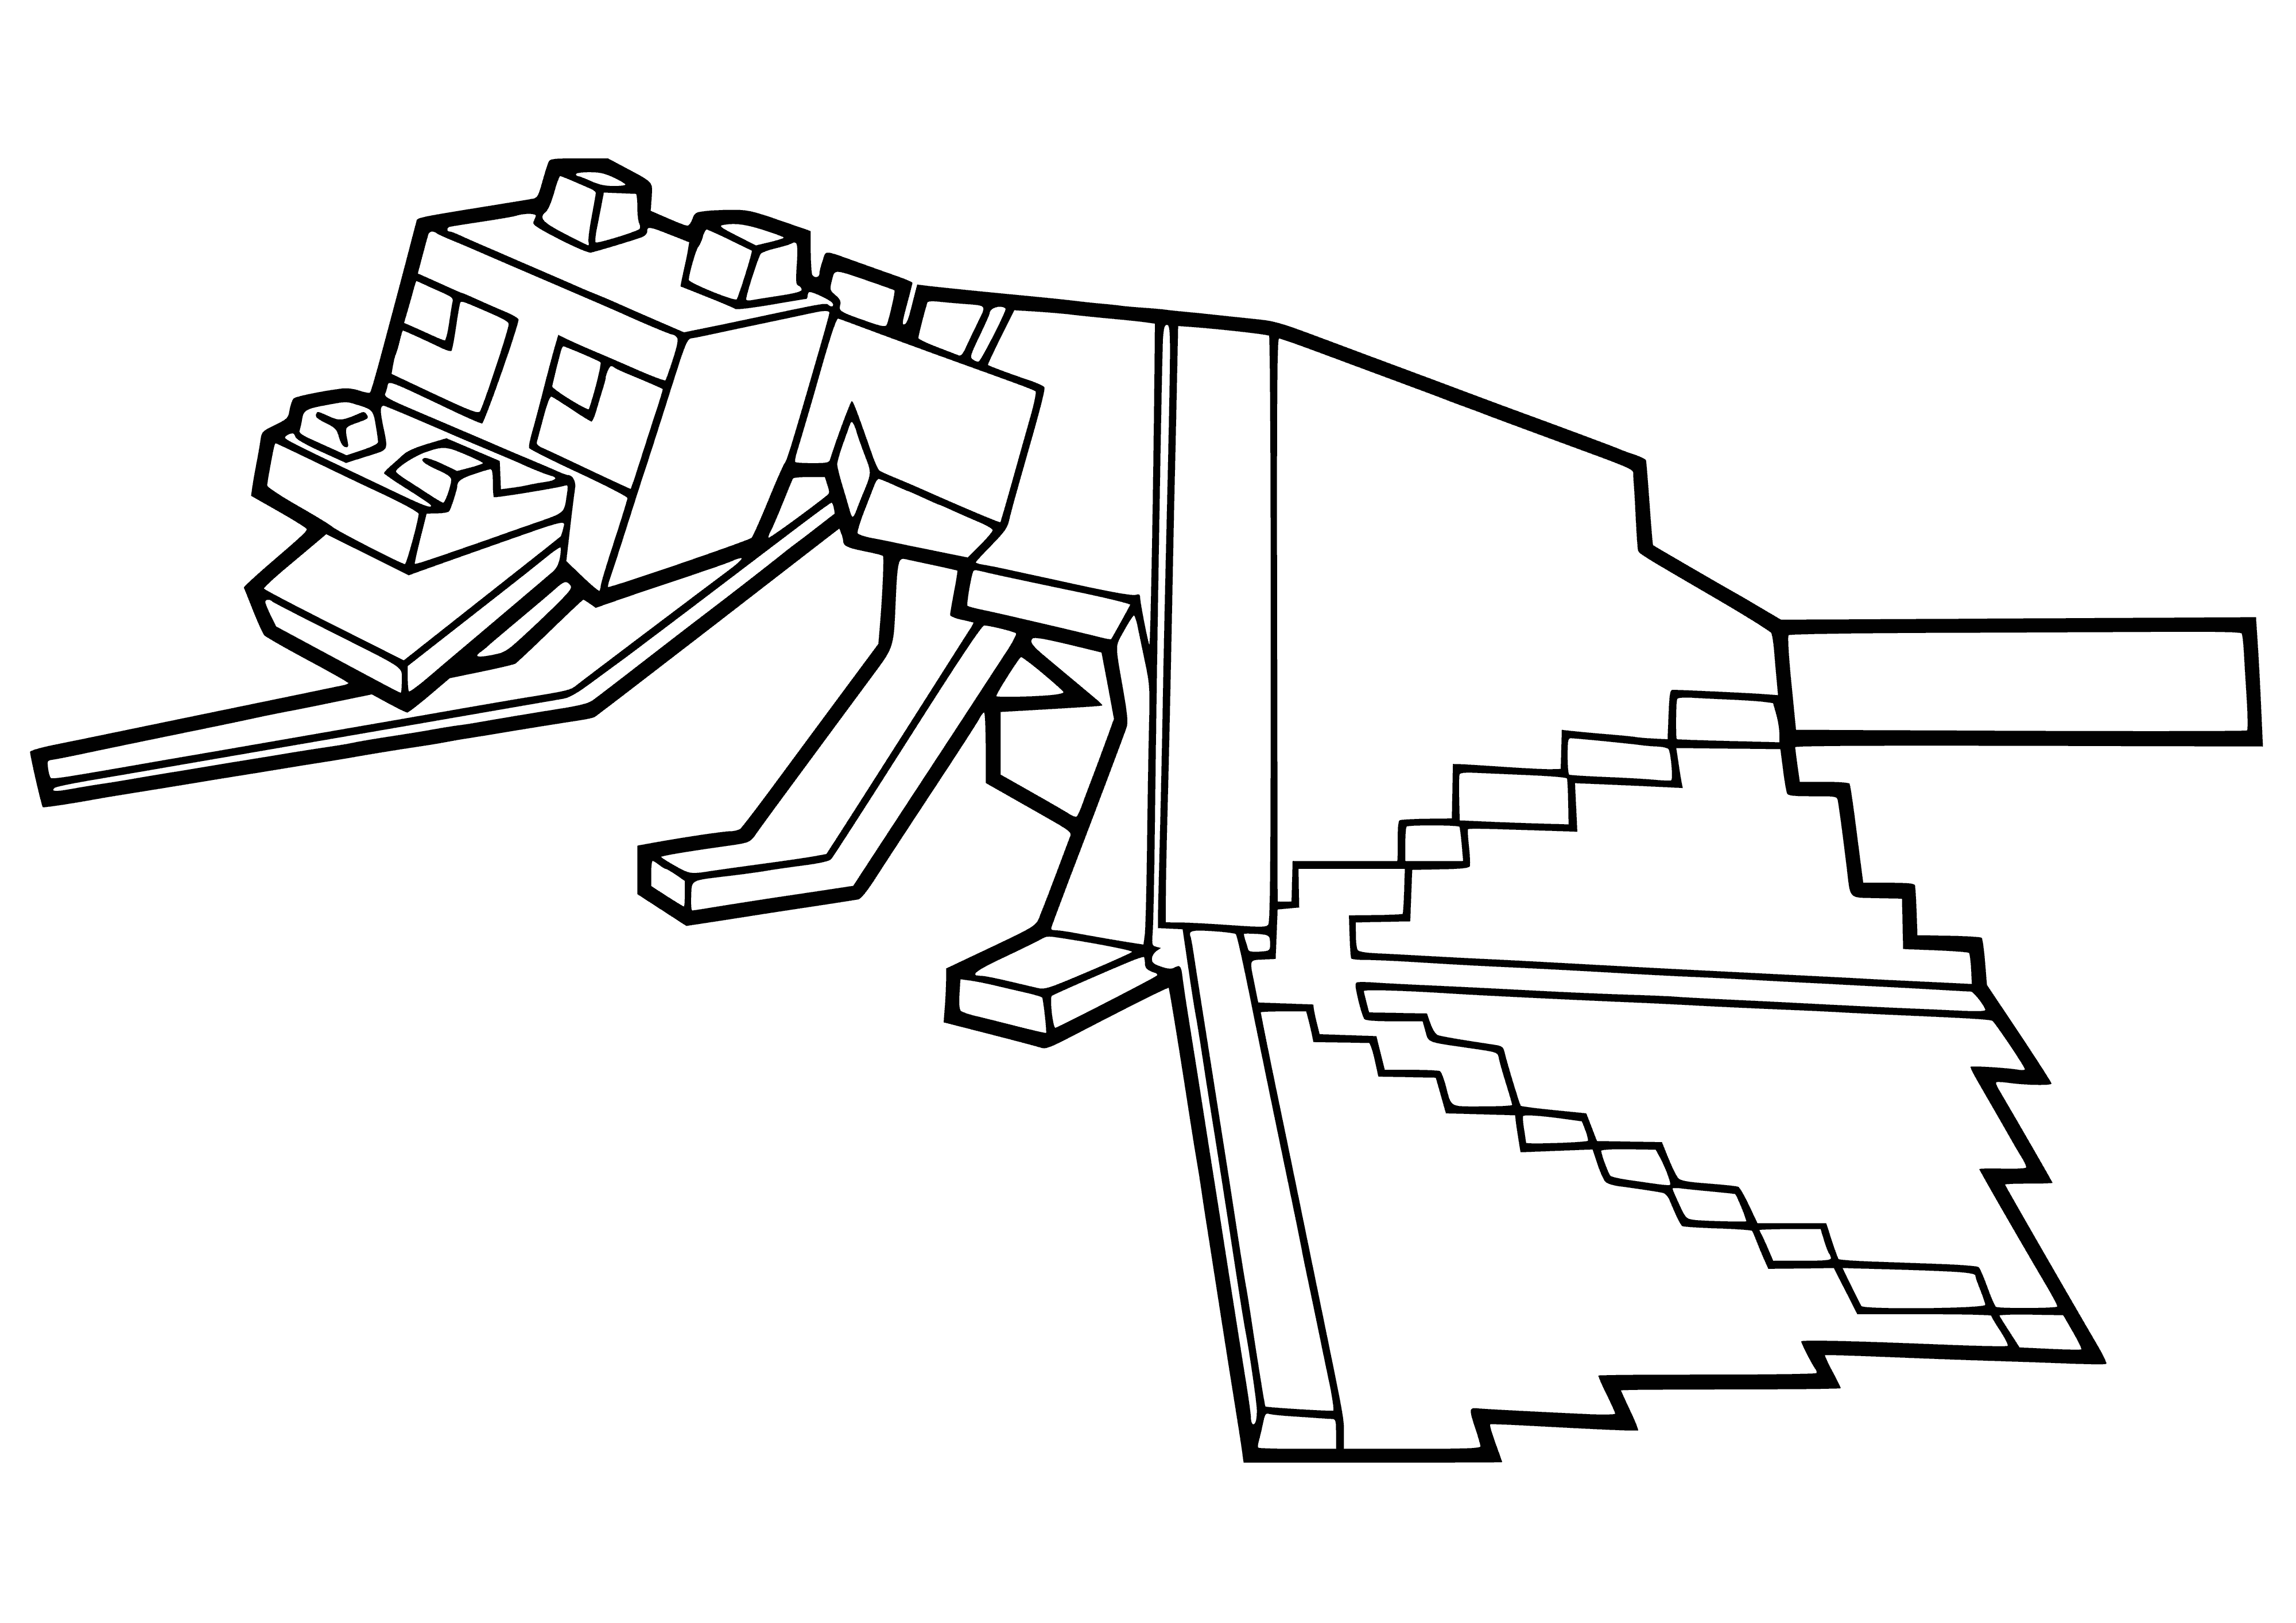 coloring page: TheMinecraft Ender's Dragon is a fierce creature with black and green scales, long neck, sharp teeth and claws that breathe fire; found in the game Minecraft.